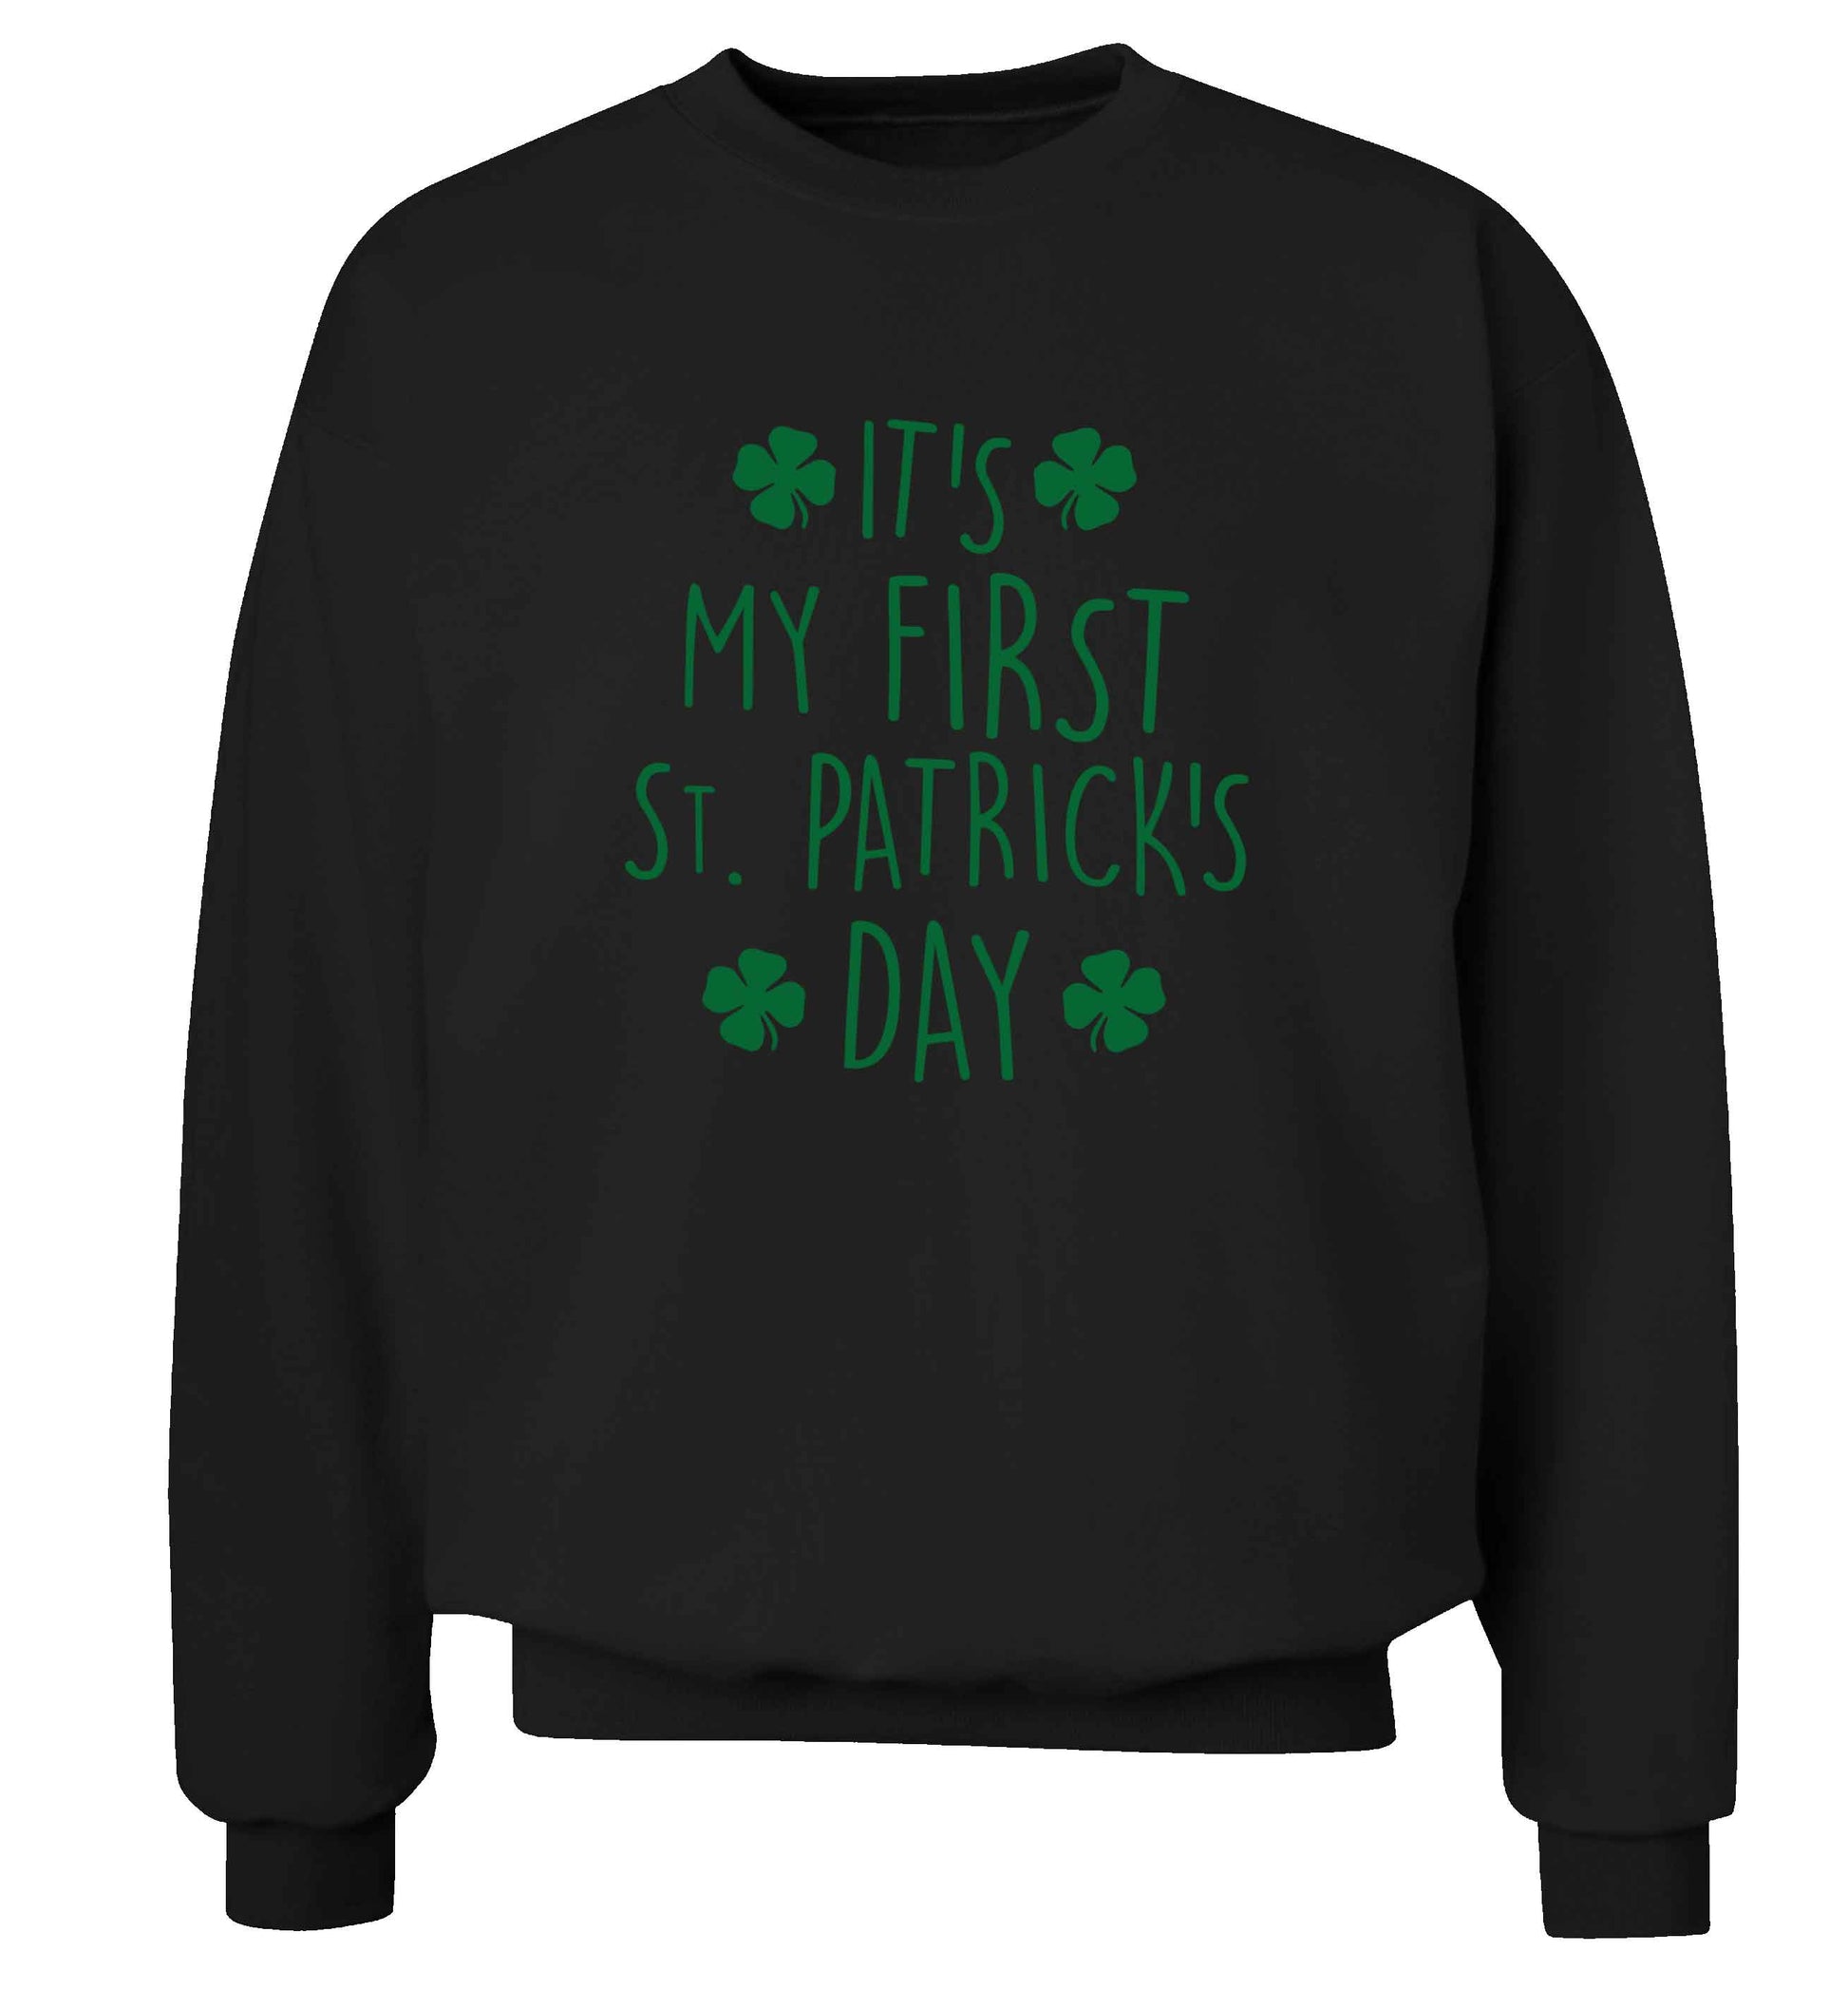 It's my first St.Patrick's day adult's unisex black sweater 2XL